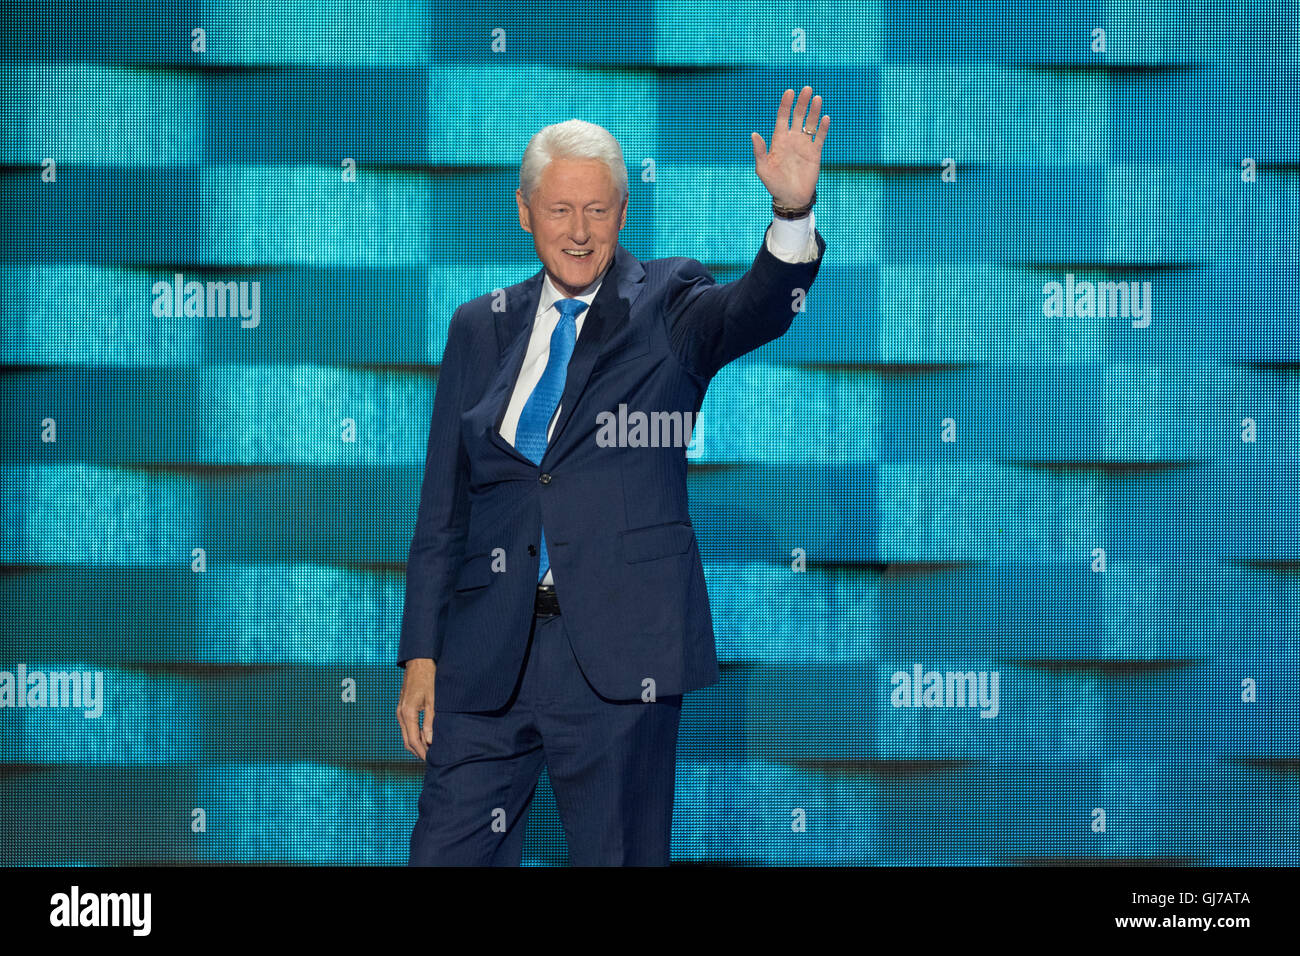 Former President Bill Clinton walks on stage for his keynote address at the 2nd day of the Democratic National Convention at the Wells Fargo Center July 26, 2016 in Philadelphia, Pennsylvania. Stock Photo